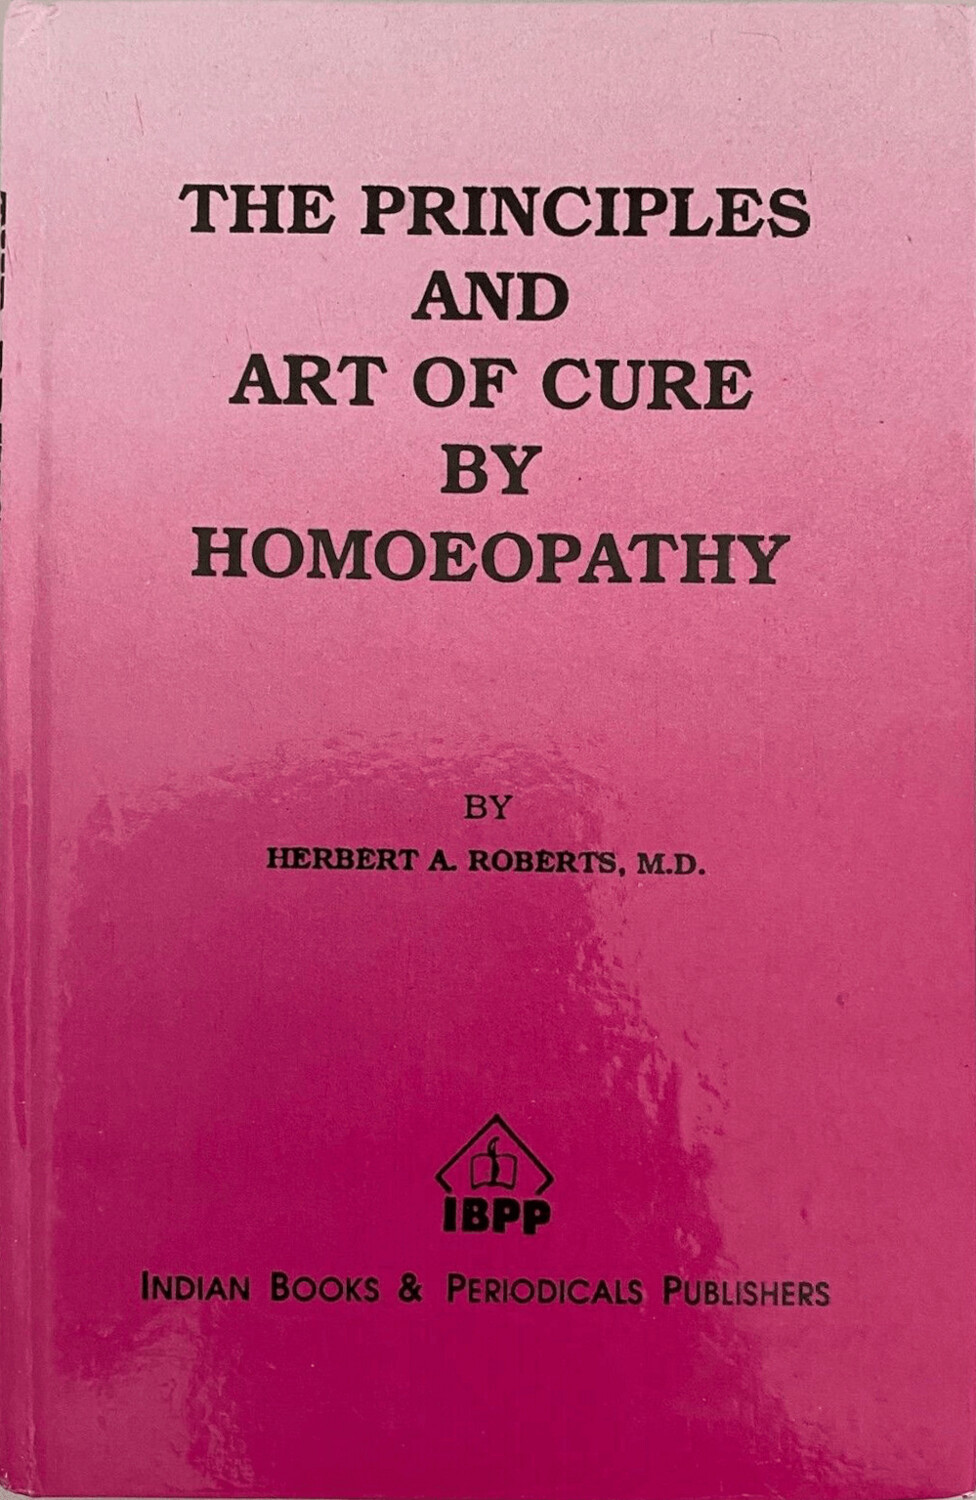 The Principles and Art of Cure by Homoeopathy* (Roberts)